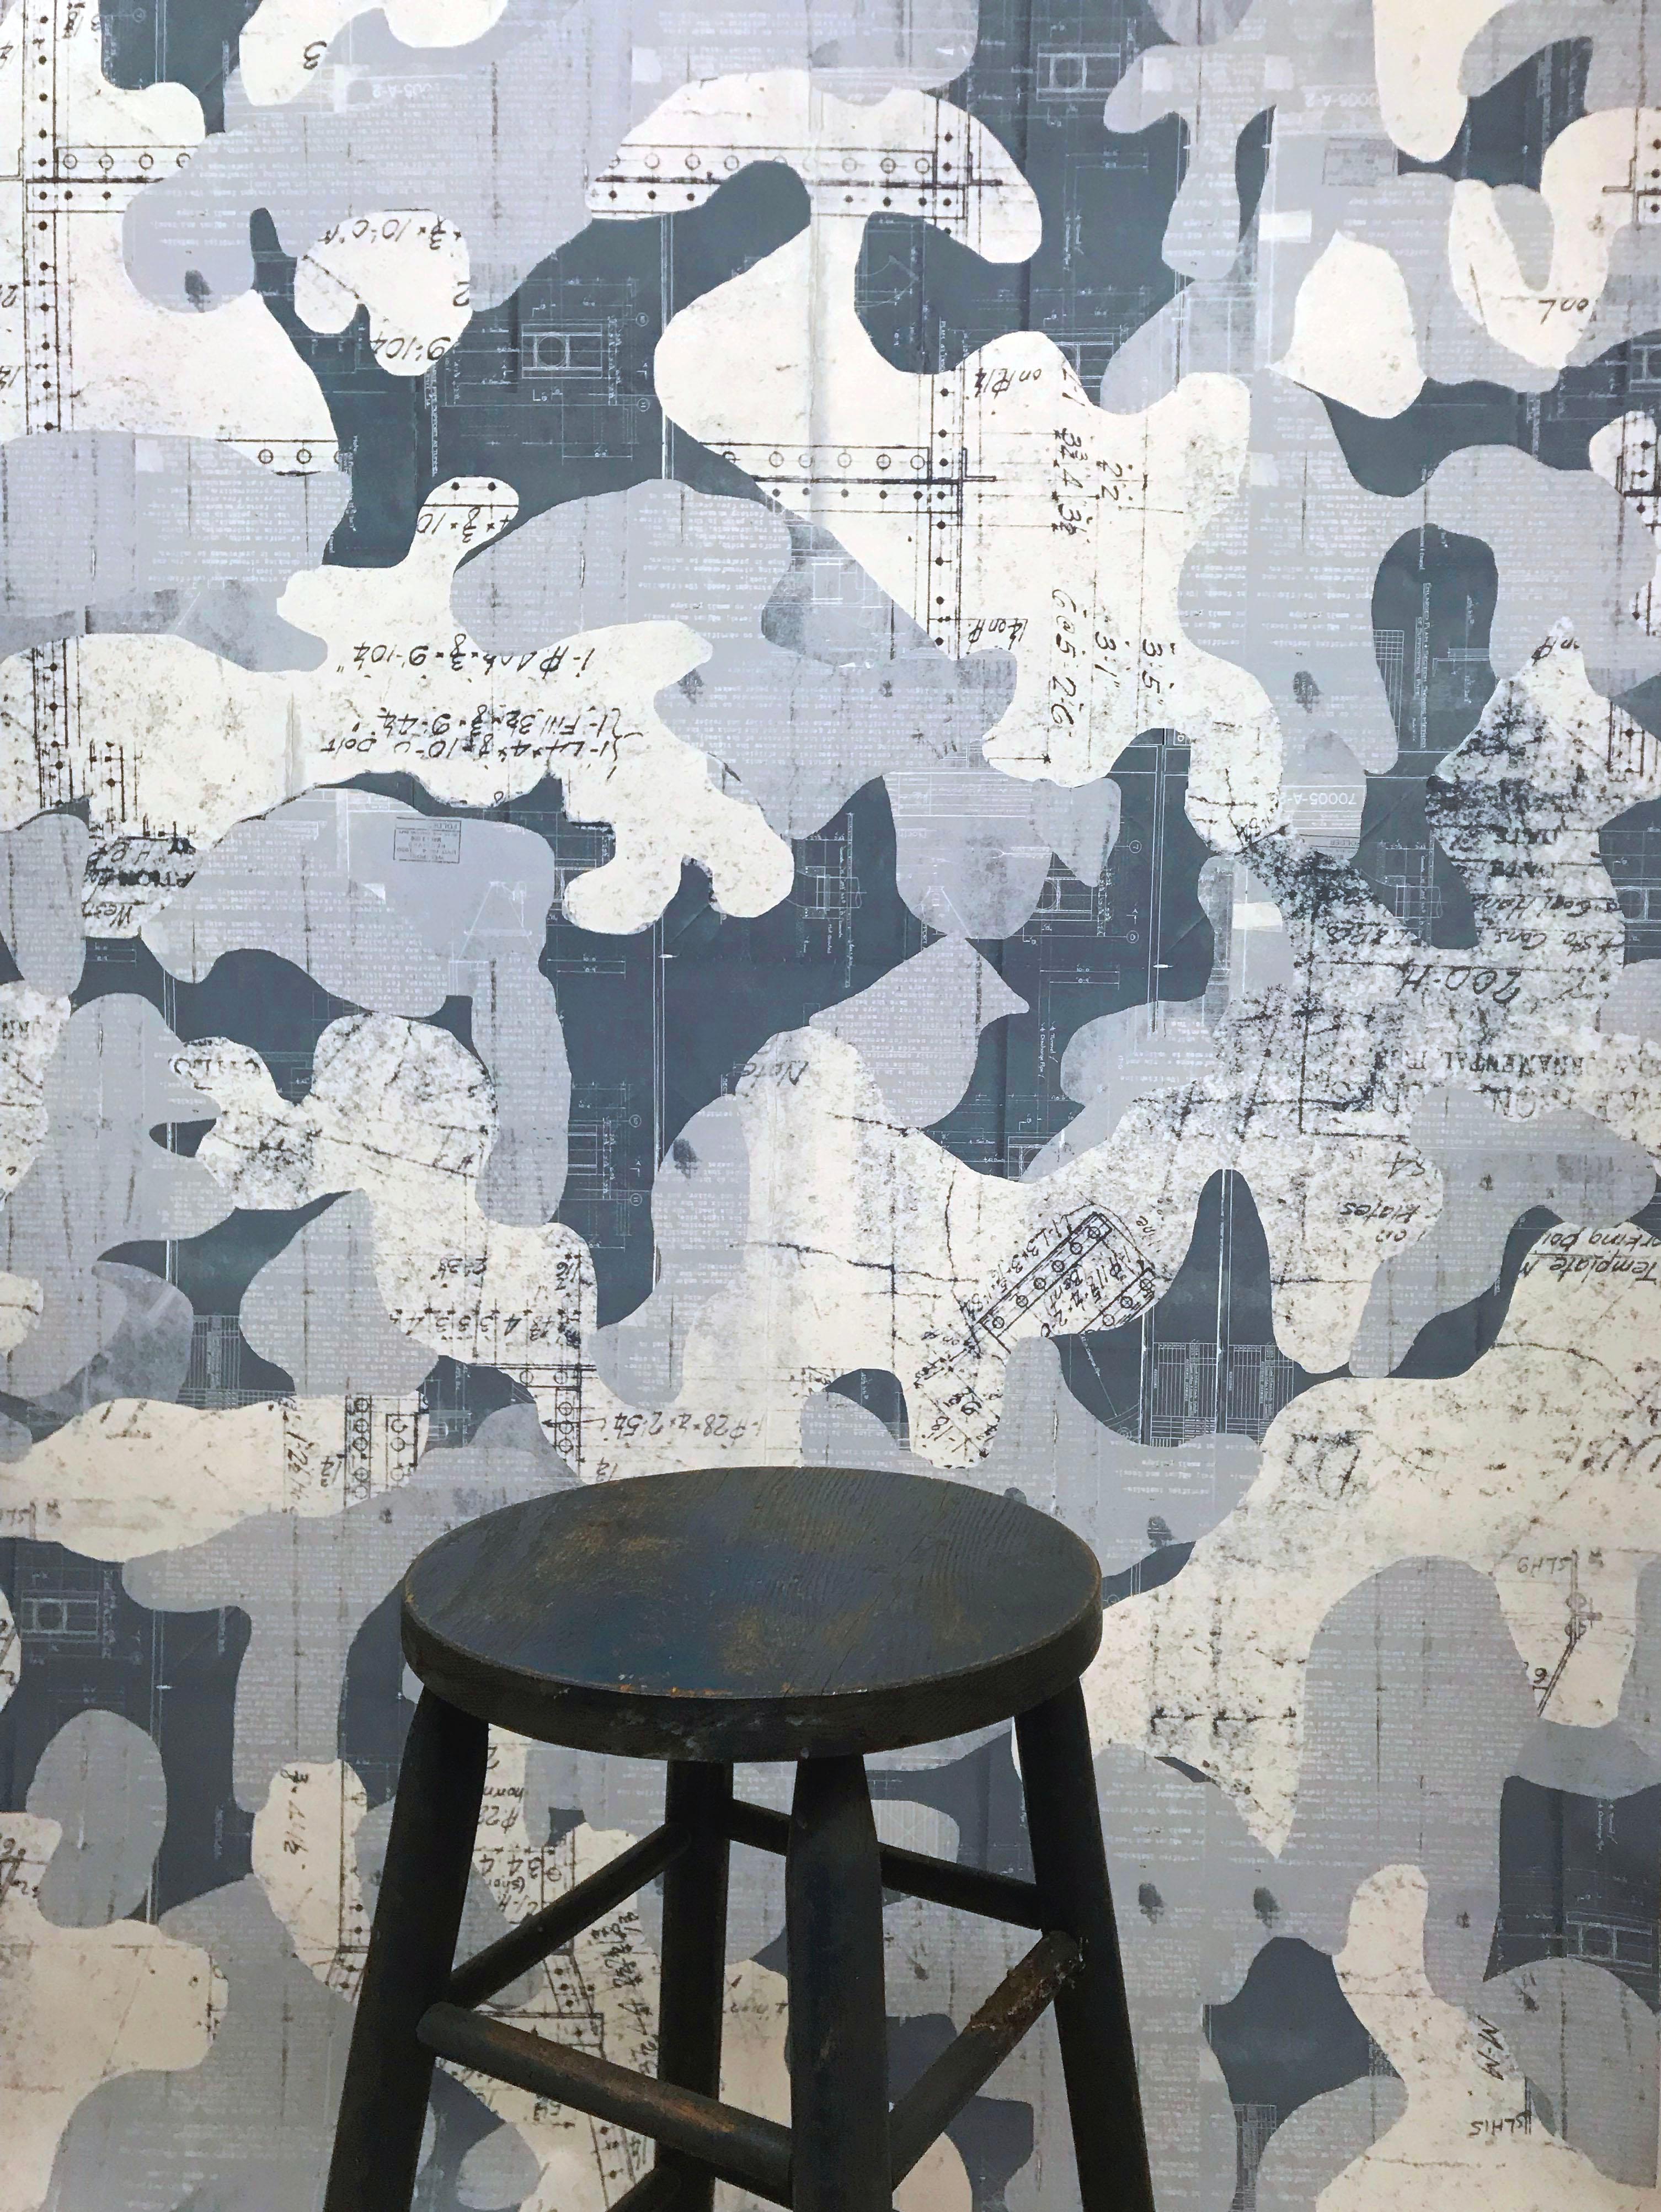 Escape was created using found vintage blue prints from the early to mid-1900s and placed into a fluid, hand drawn camouflage pattern. Intrigued by the idea that blue prints and camo have a utilitarian purpose, we combined them creating an opposite